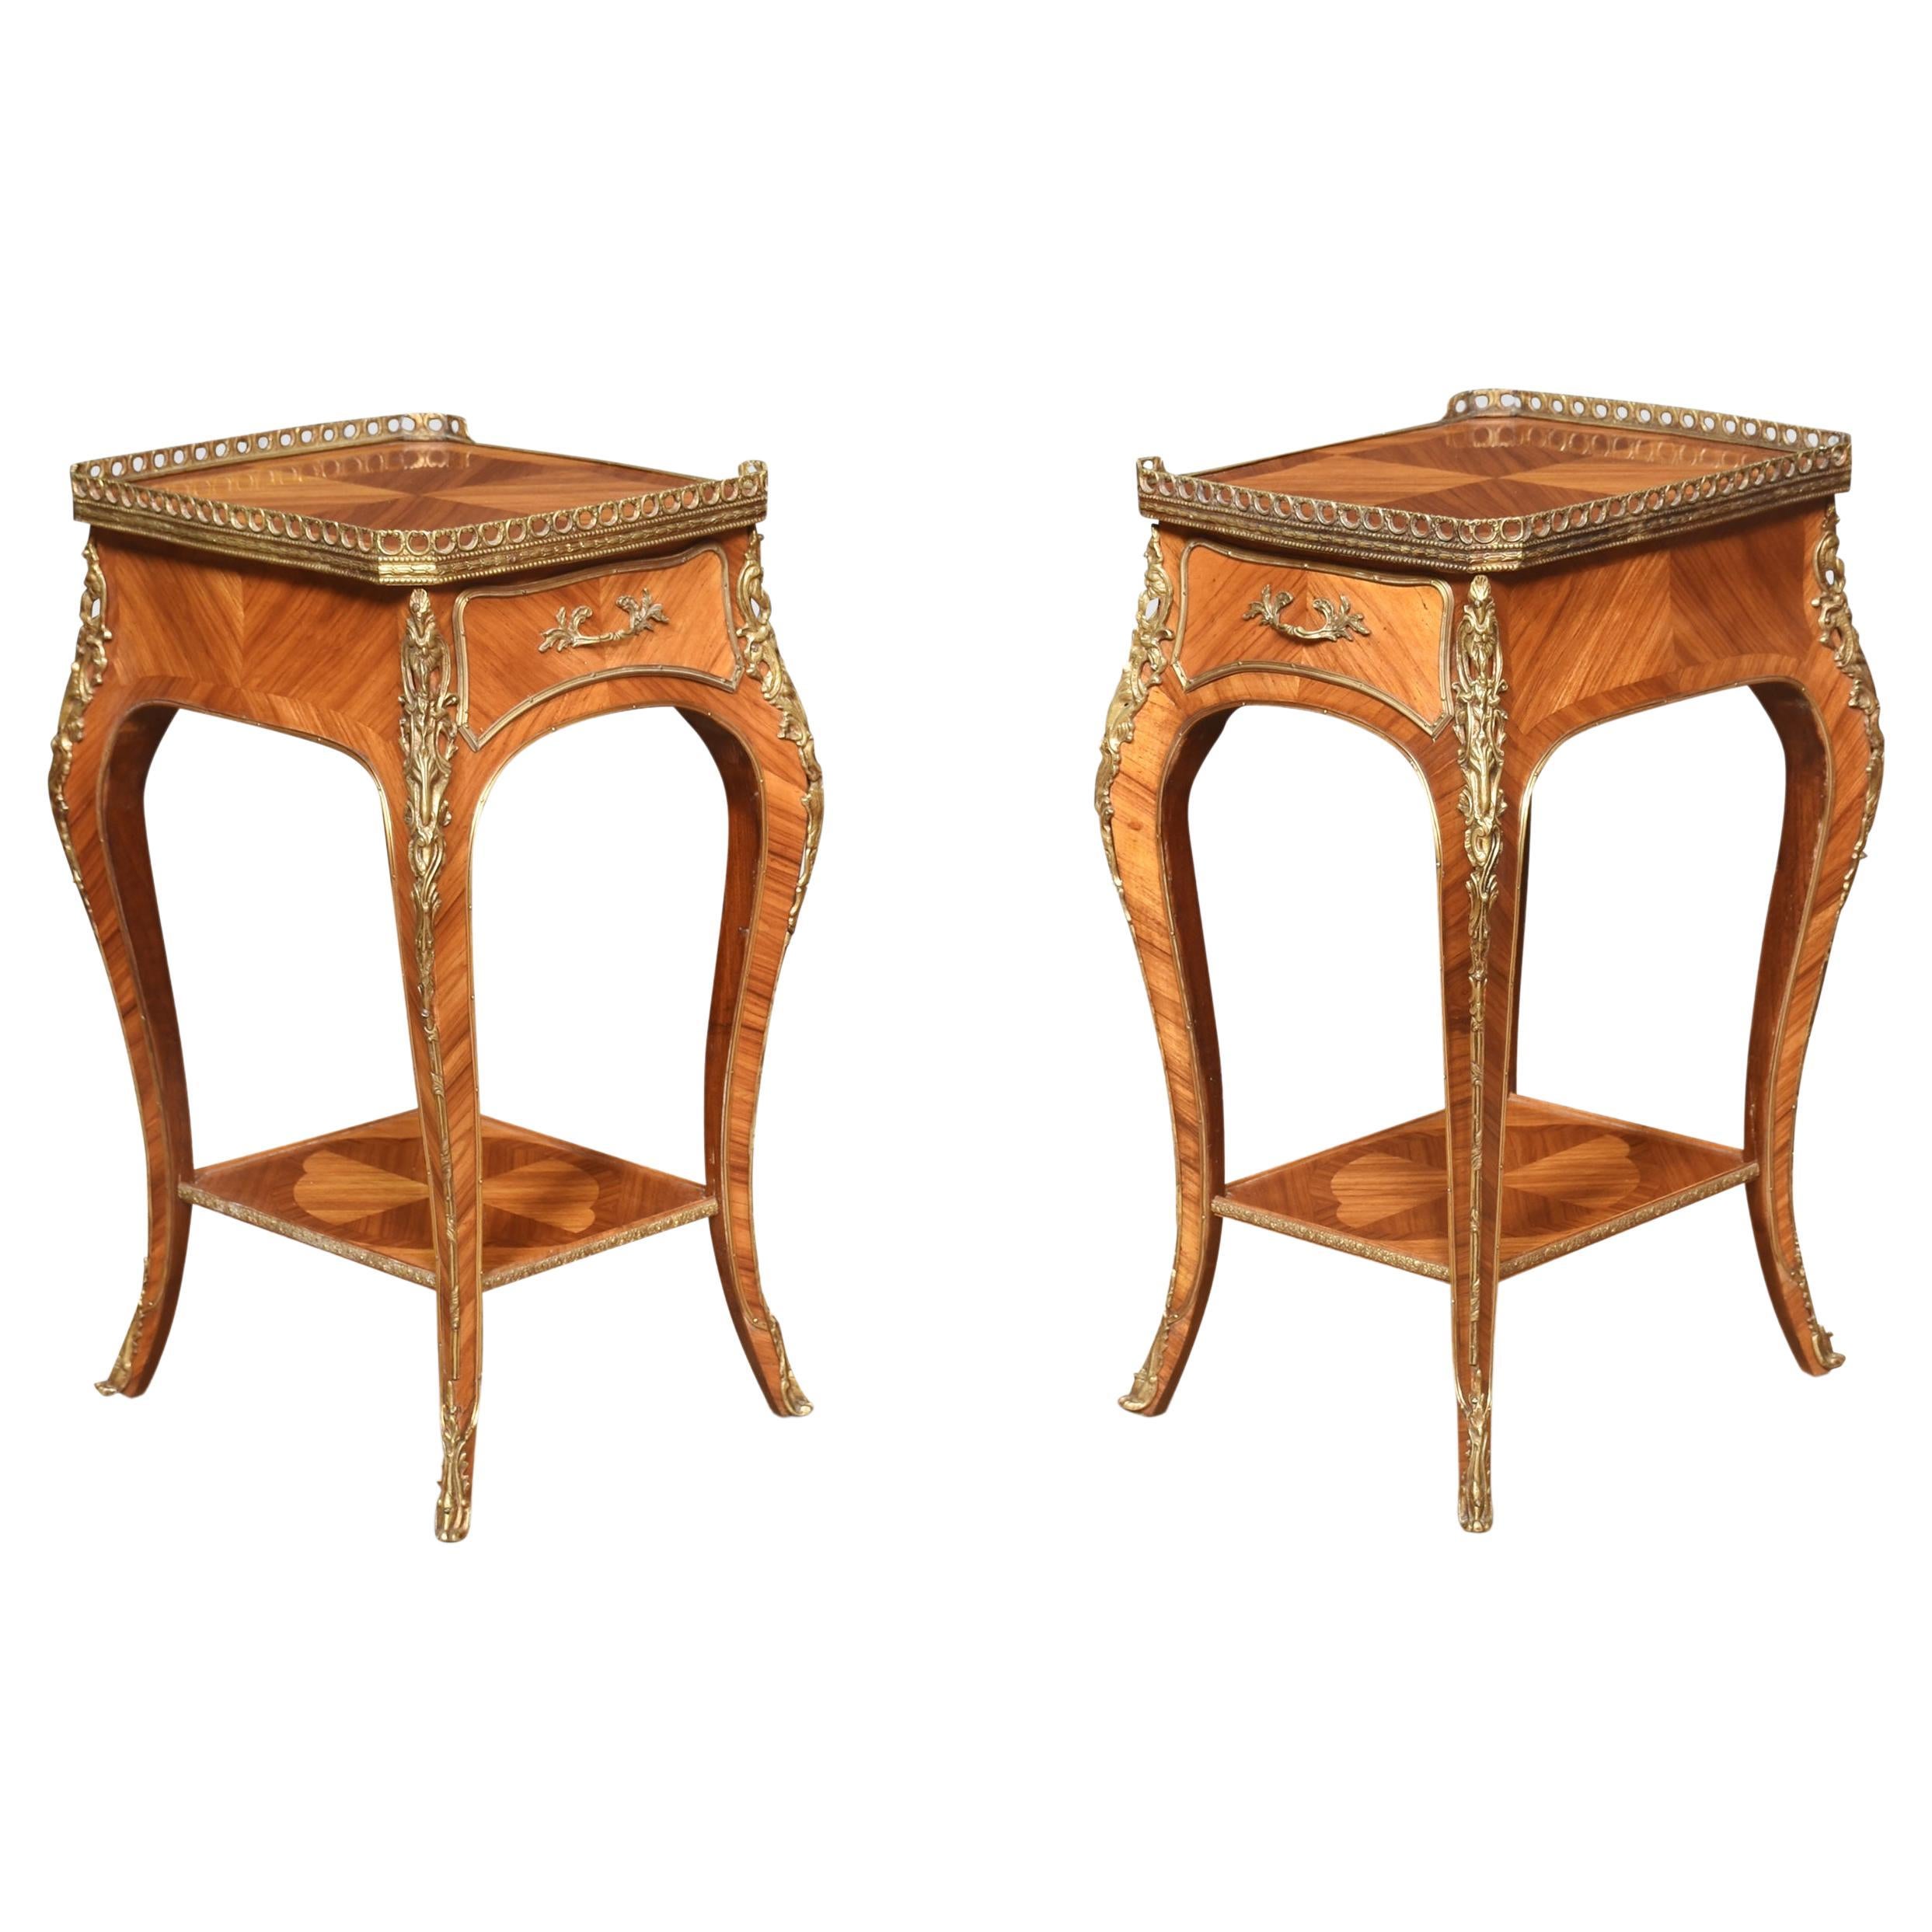 Pair of Walnut and brass night stands